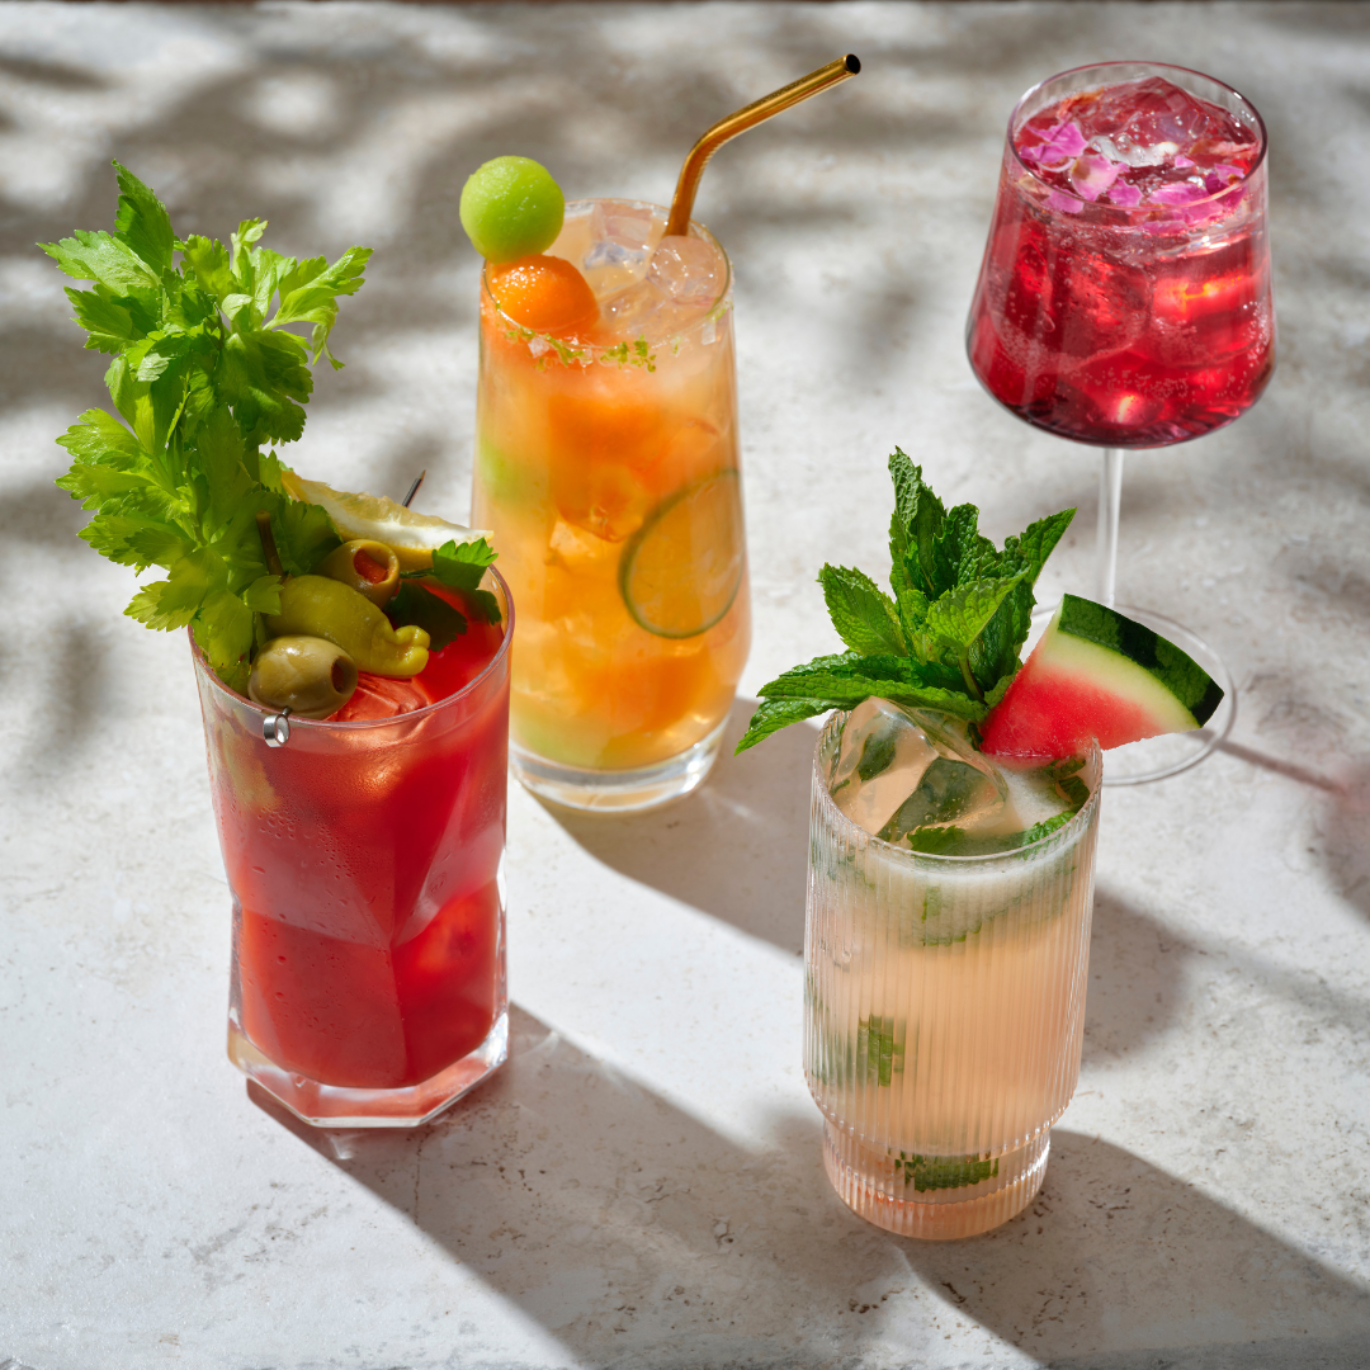 What Consequences Do Mocktails Have On Your Health?